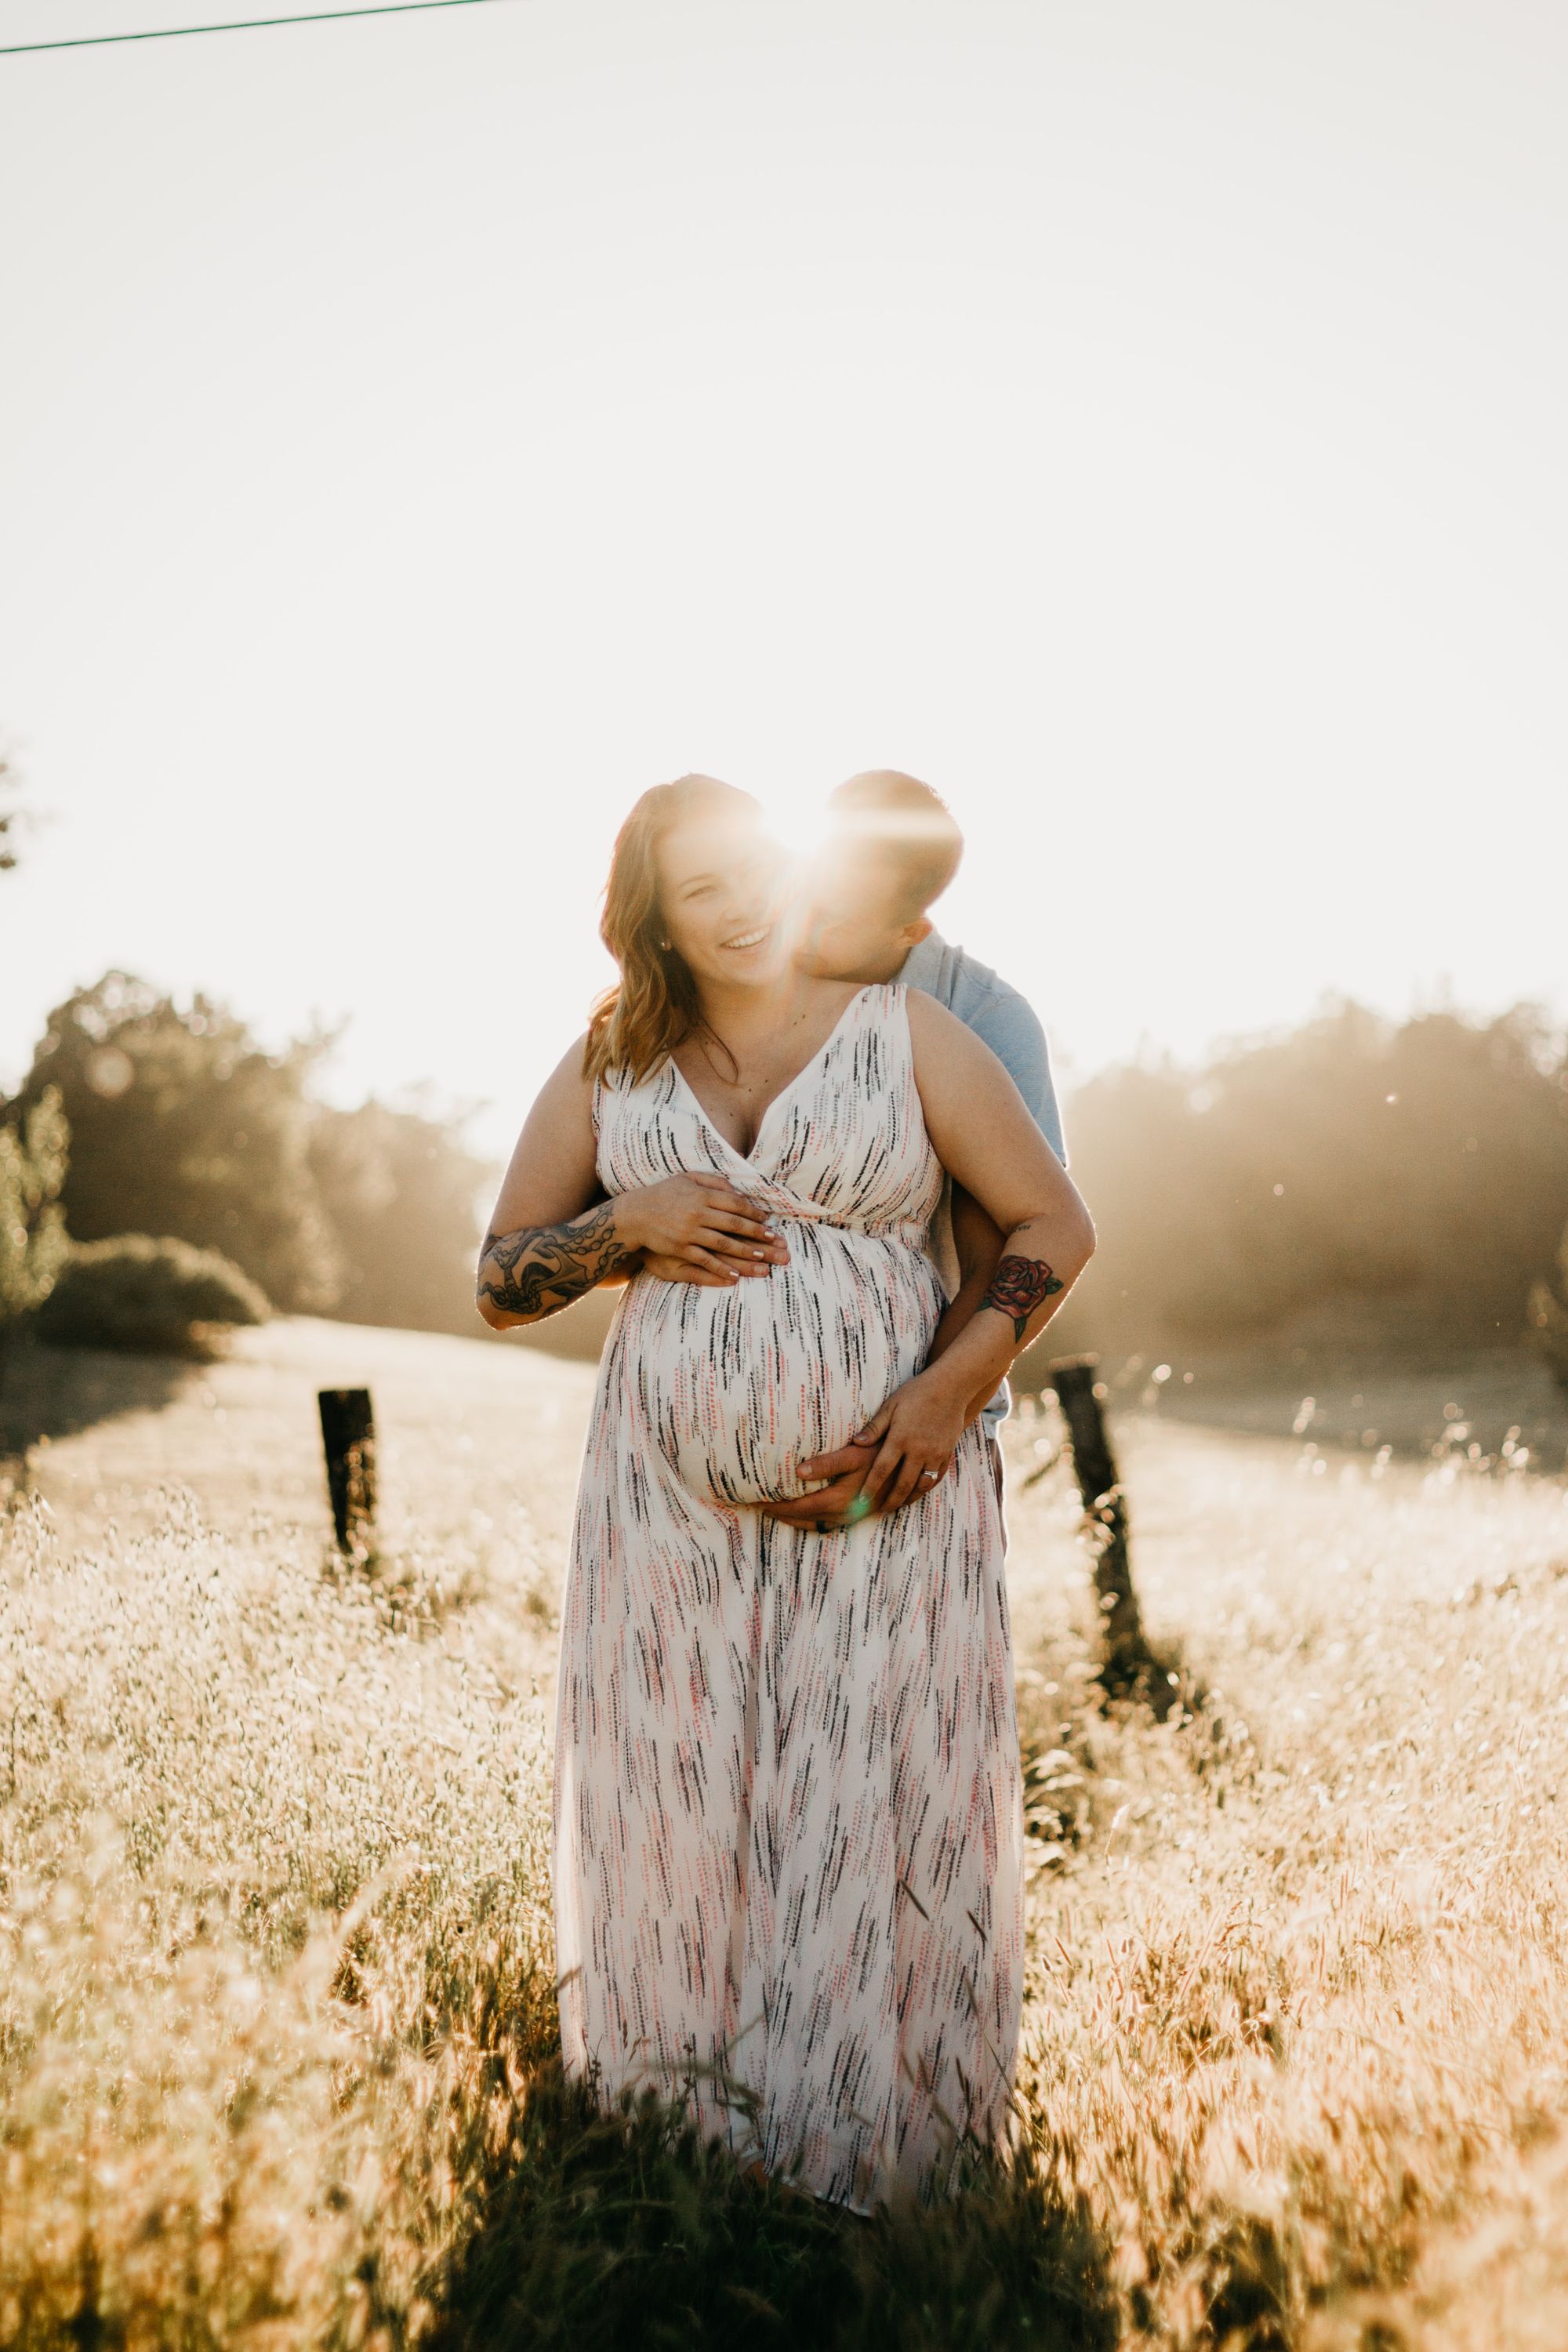 Valentine's Day Gifts for Pregnant Wife - 4 Awesome Ideas!